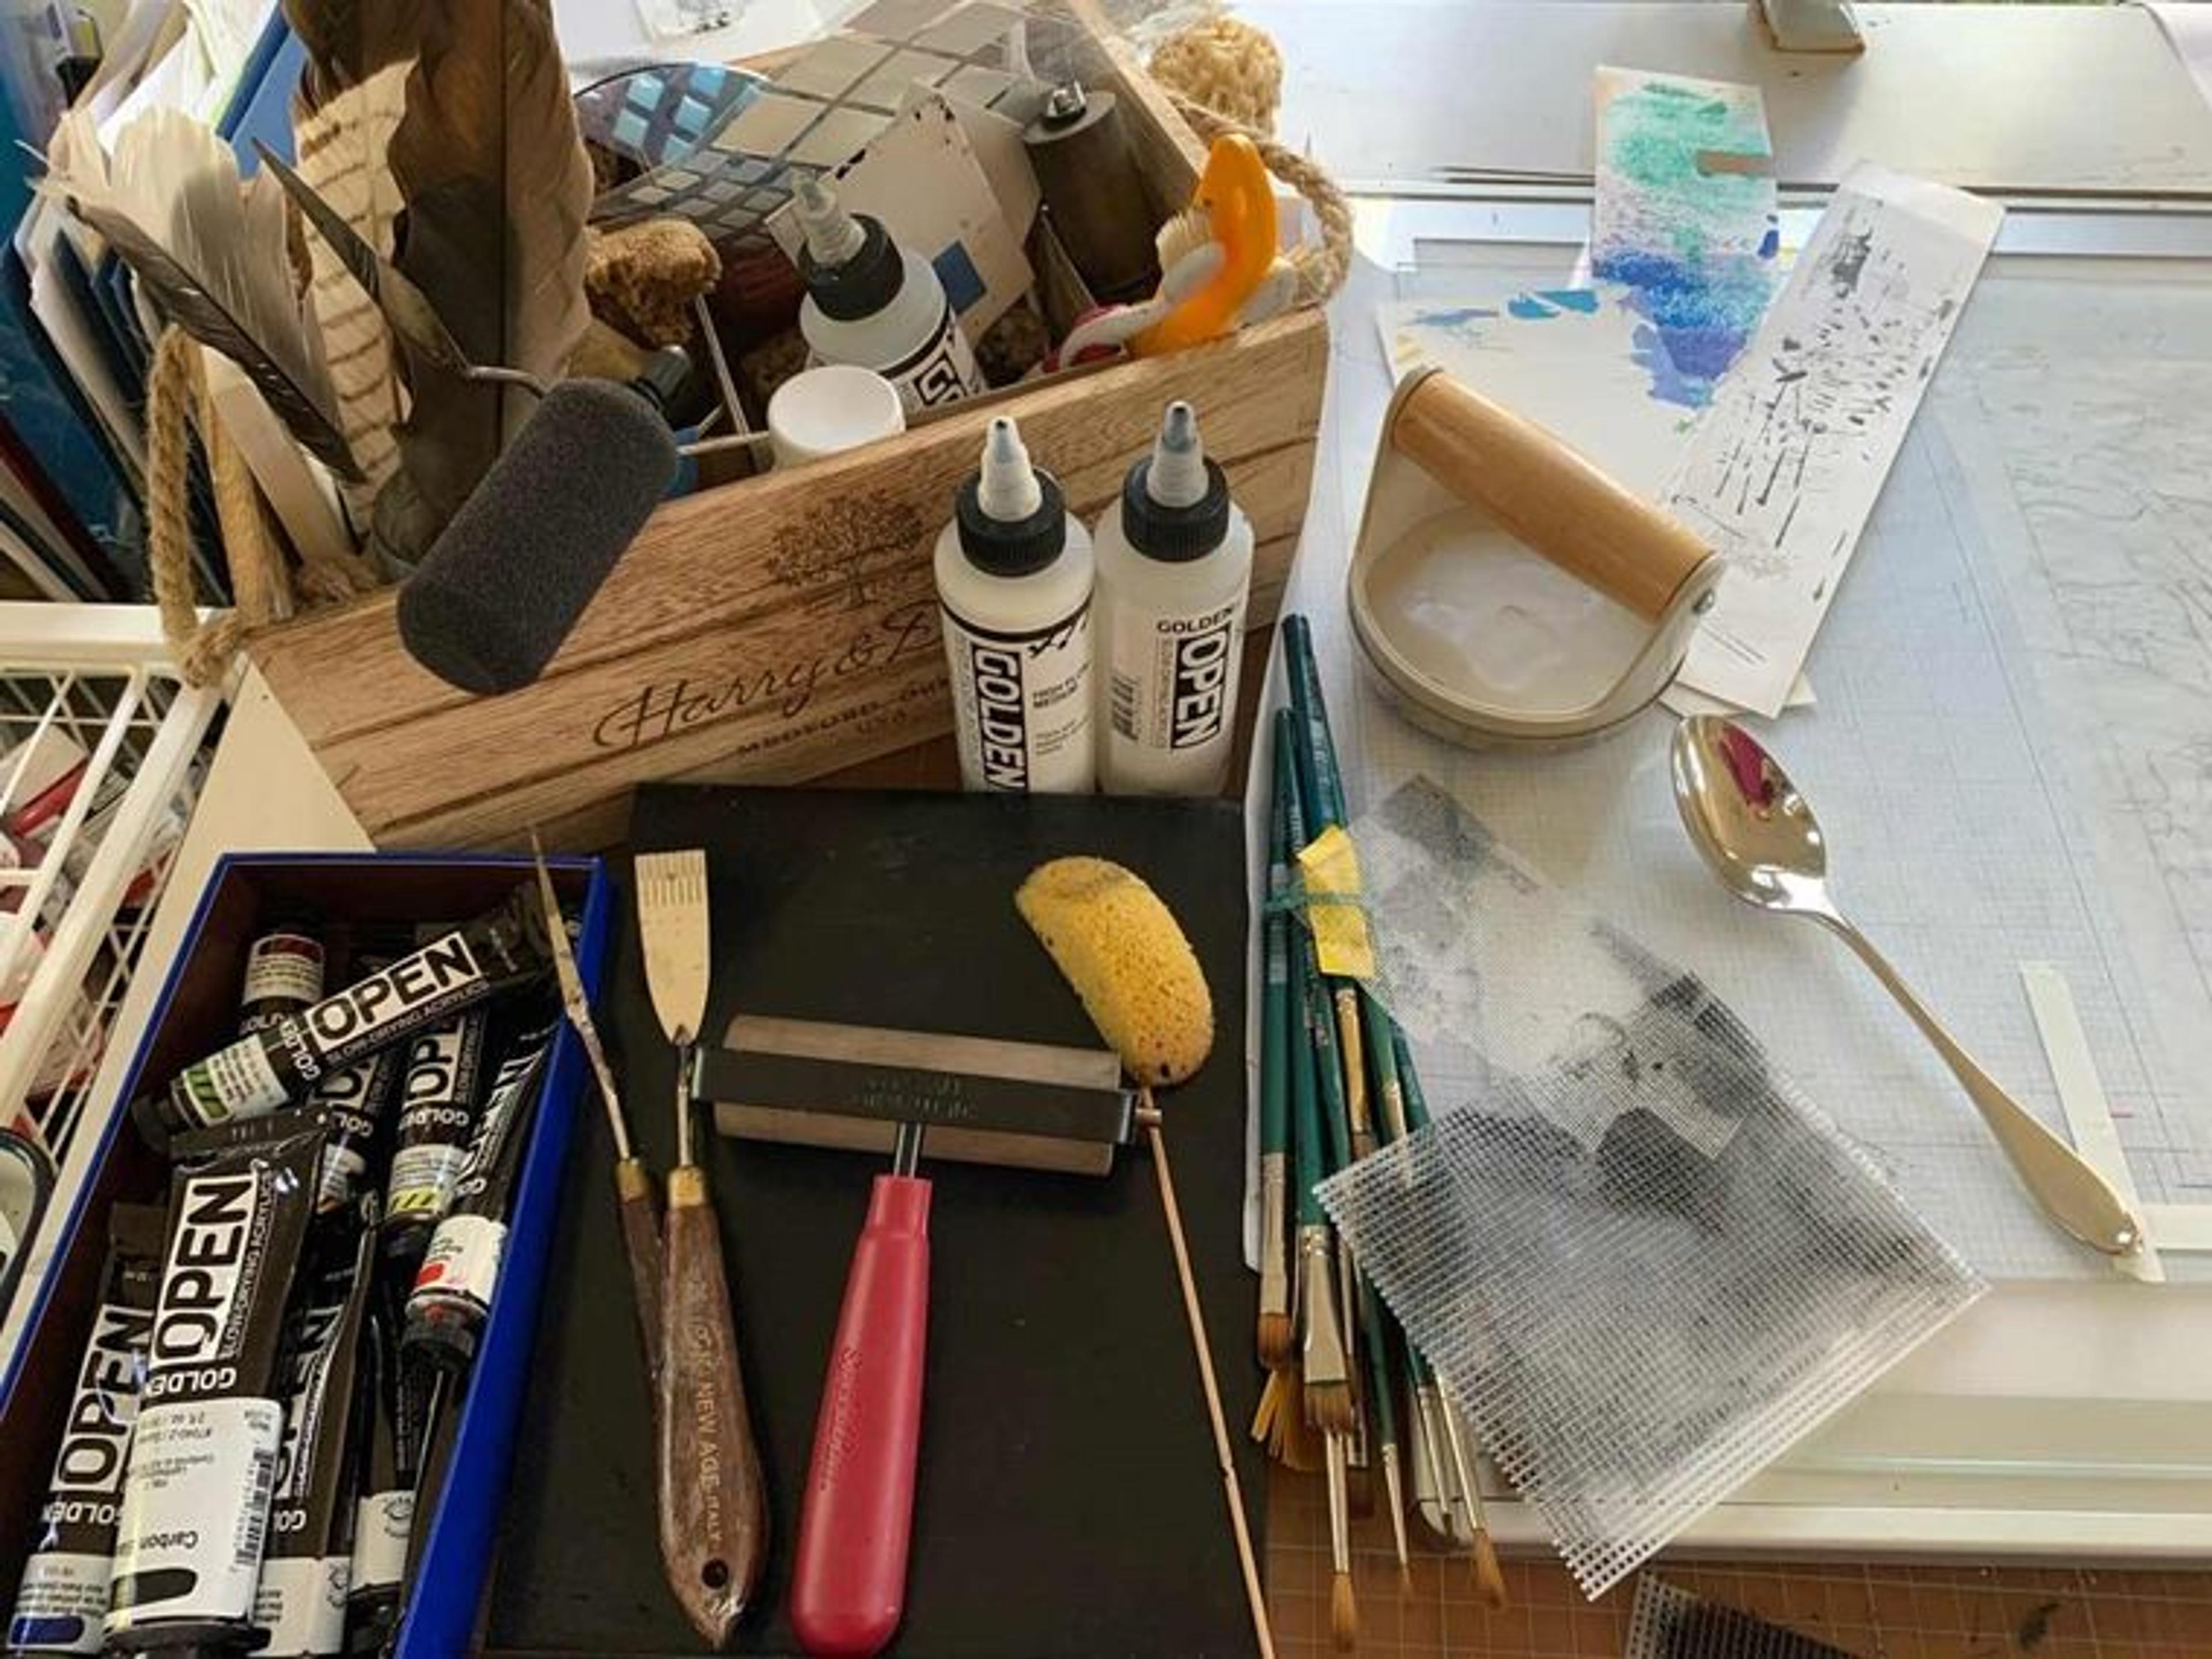 A collection of art supplies, including inks, paints, sponges, knives, and a palm-sized disc-shaped object with a wooden handle.